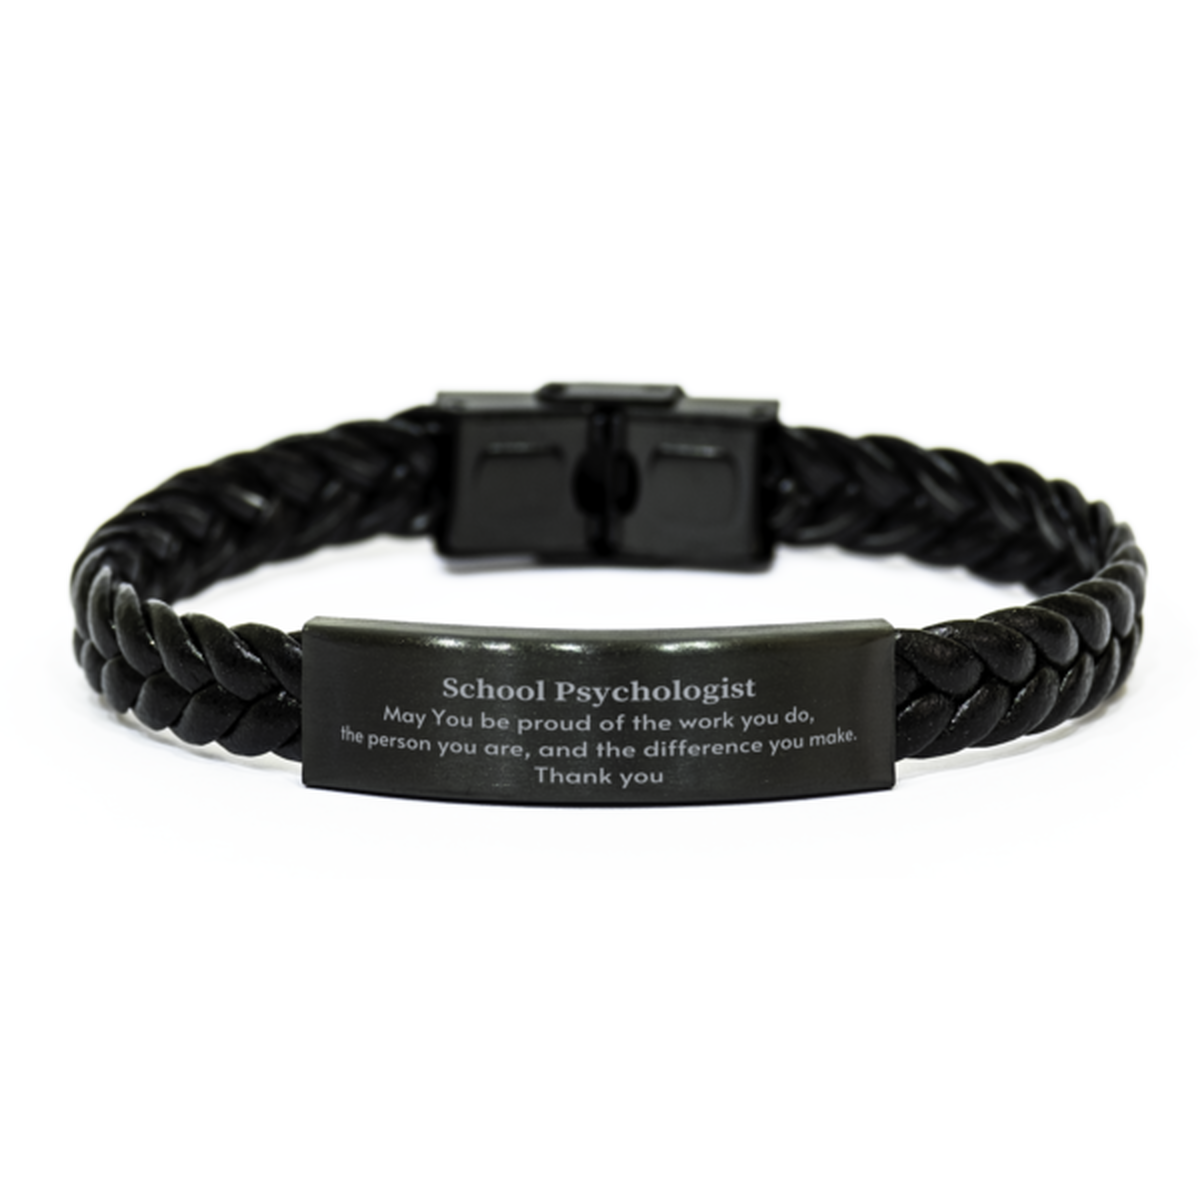 Heartwarming Braided Leather Bracelet Retirement Coworkers Gifts for School Psychologist, School Psychologist May You be proud of the work you do, the person you are Gifts for Boss Men Women Friends